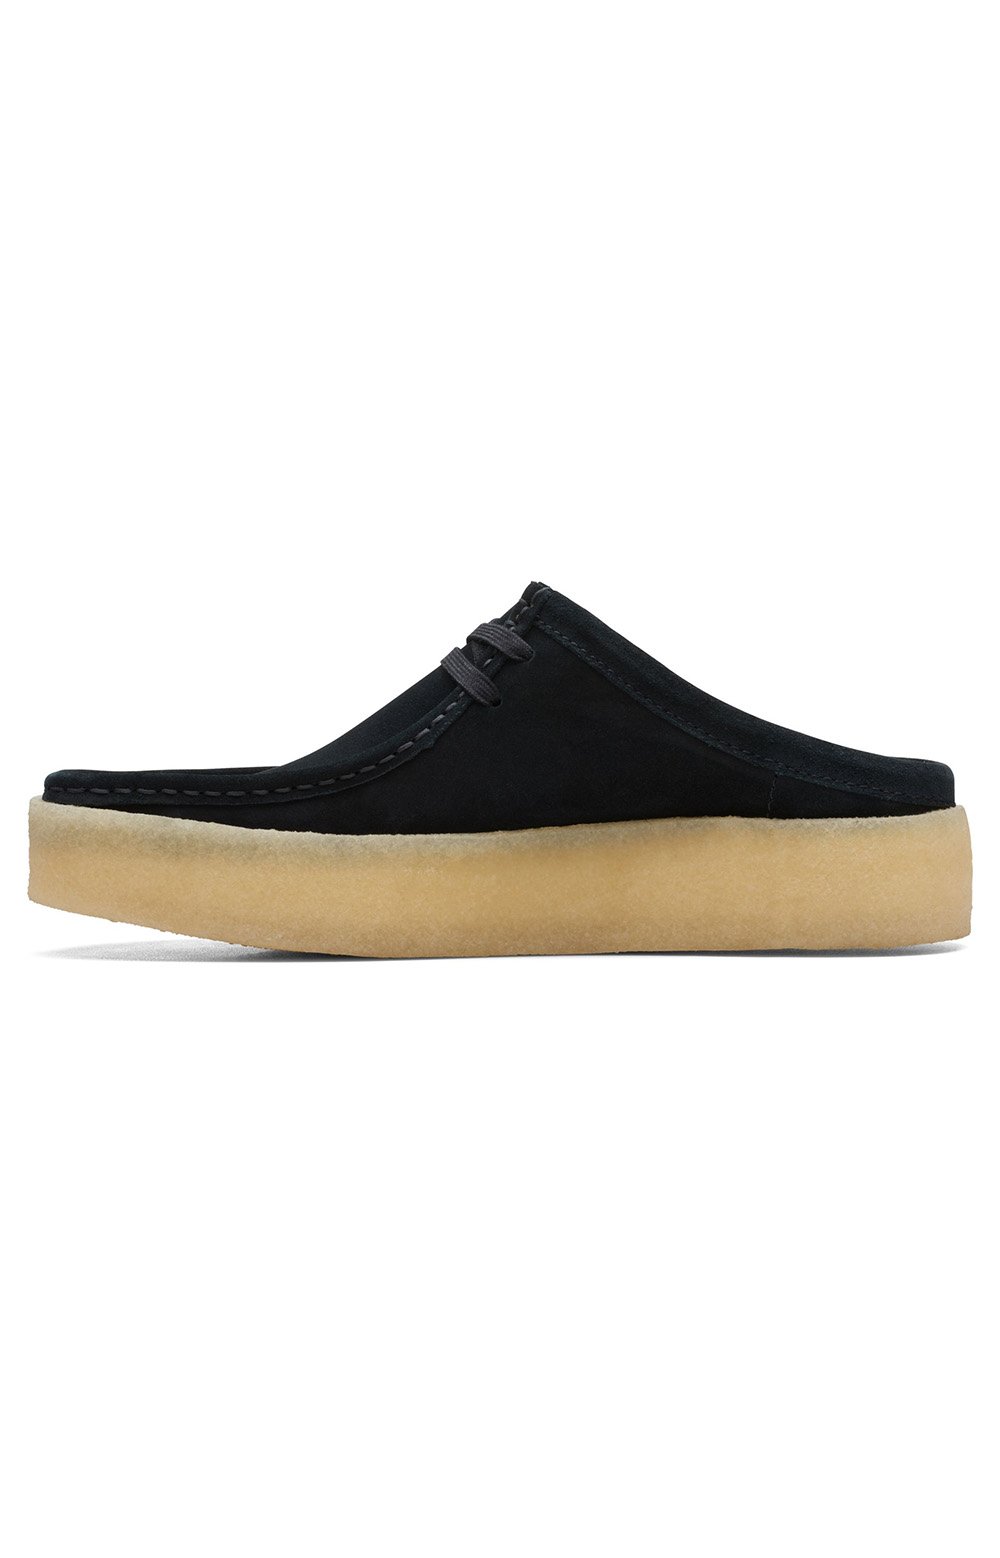 An overhead view of the Clarks Originals Wallabee Cup Low Men's Black Suede 26167285 shoes, highlighting their sleek silhouette and quality materials